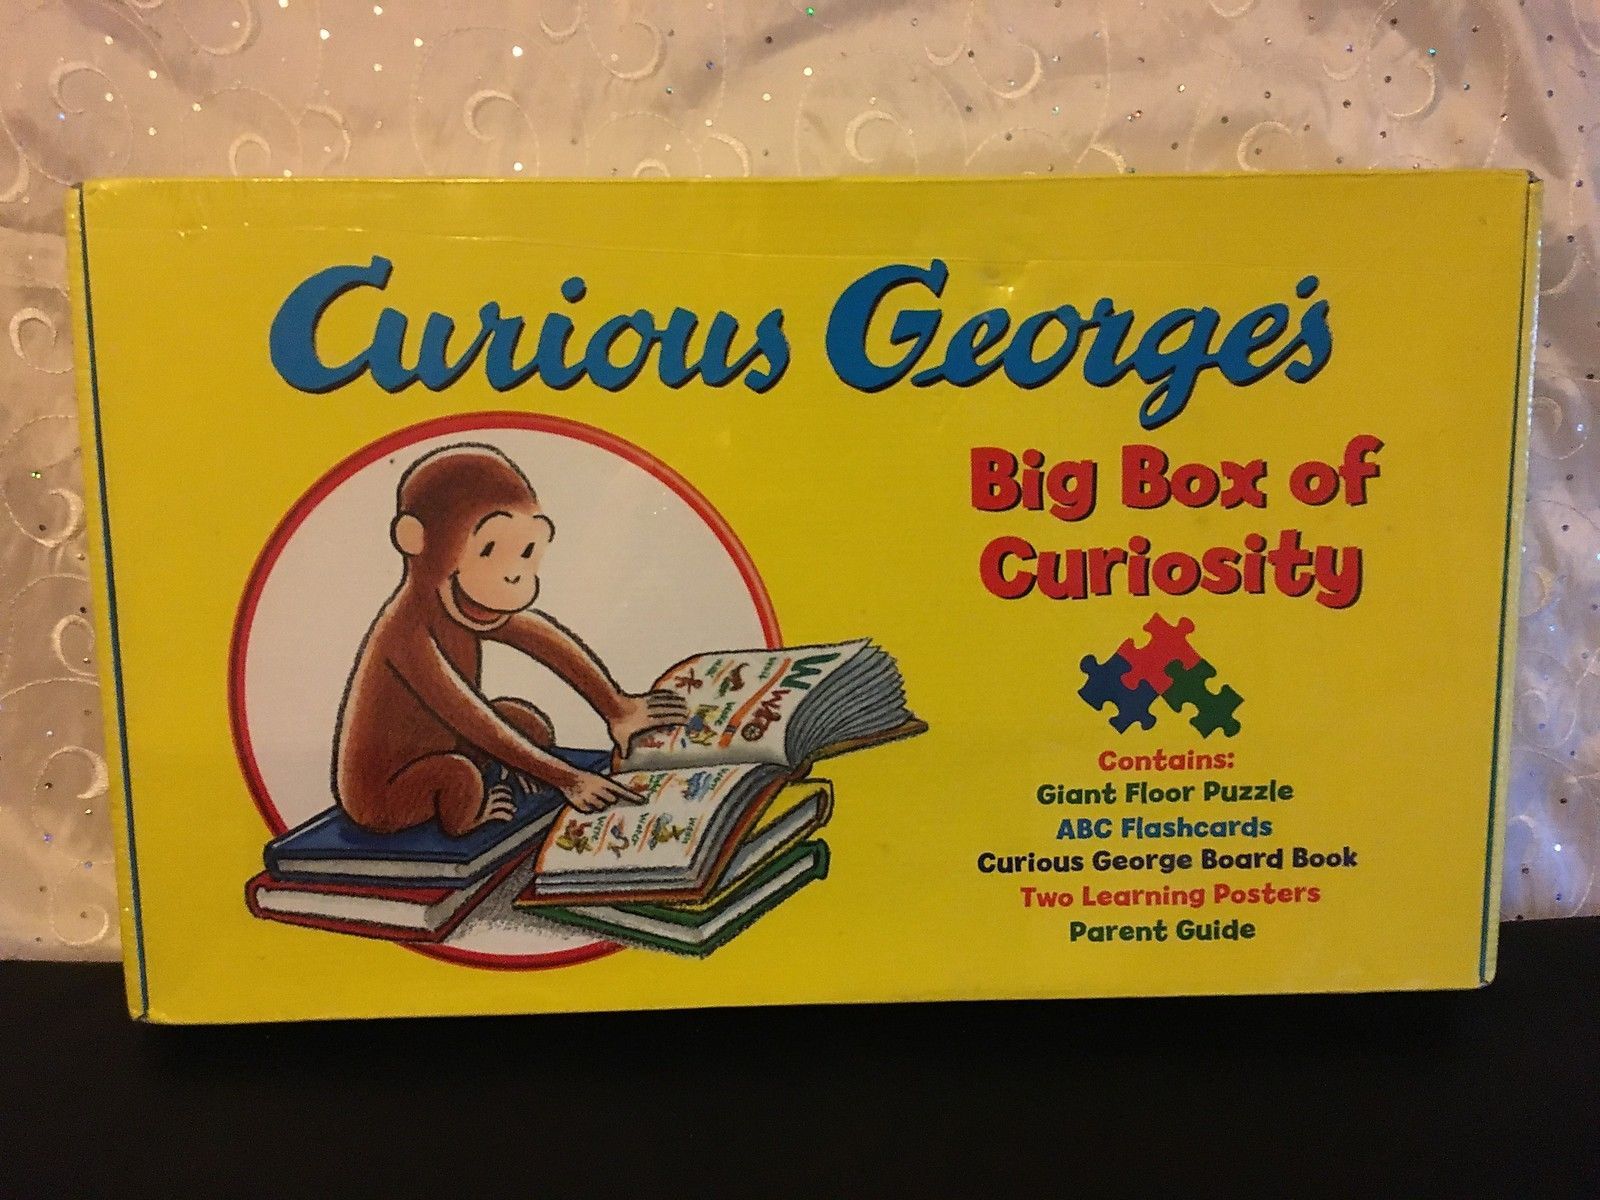 50　similar　and　Of　George's　Brand　Curiosity　Curious　Box　Big　items